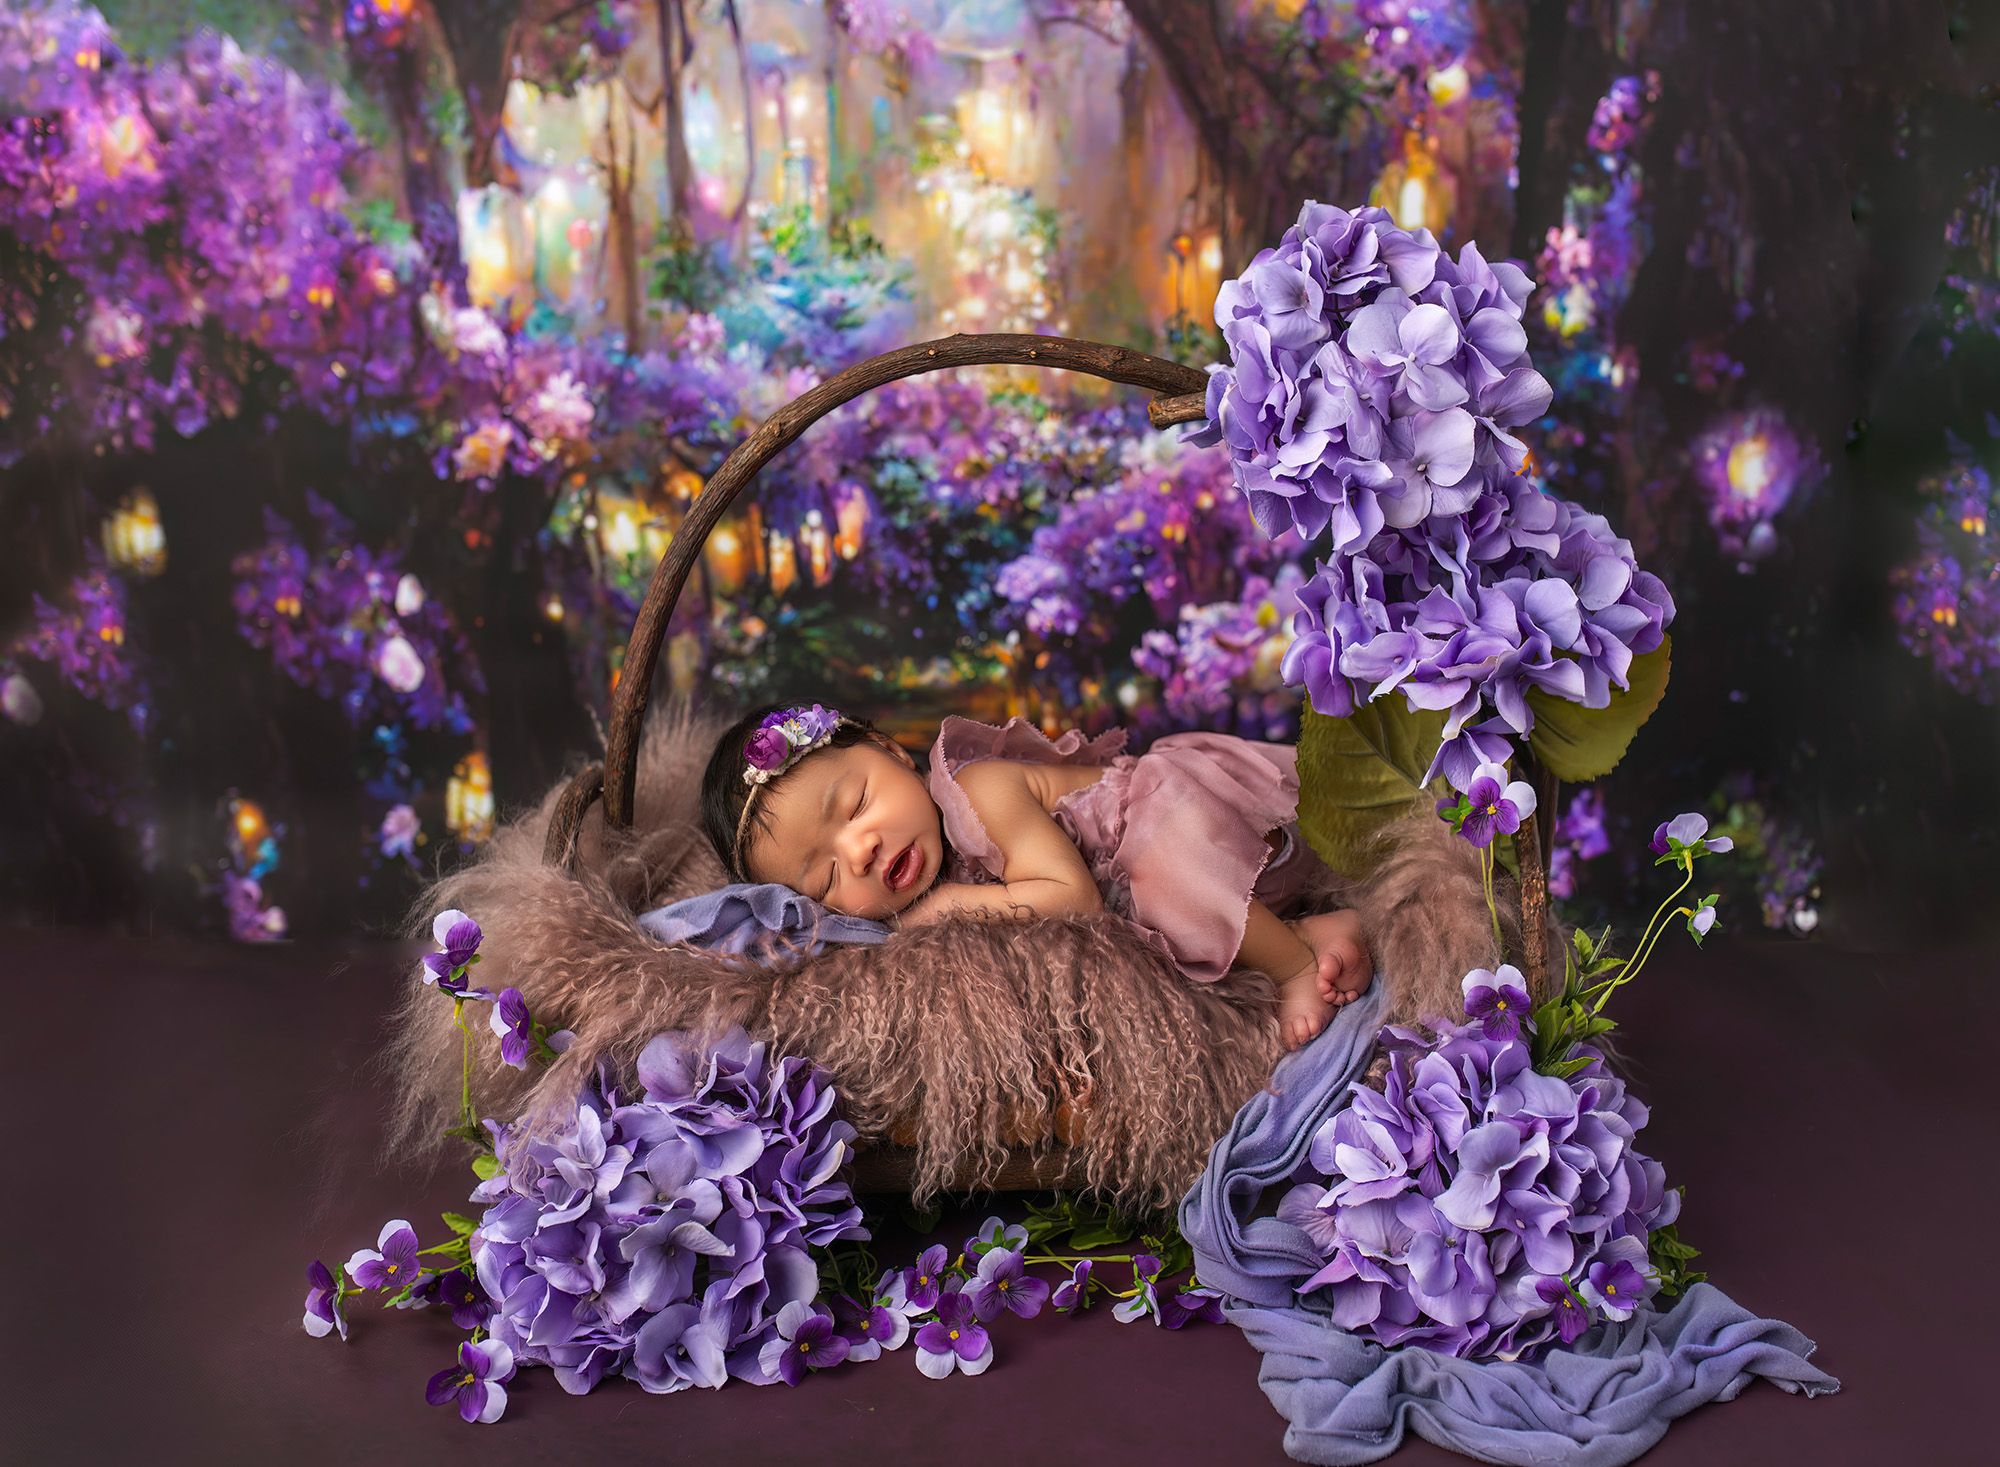 In Studio Newborn Photography little girl sleeping on rustic wood bed, surrounded by purple hydrangeas and fairy lights